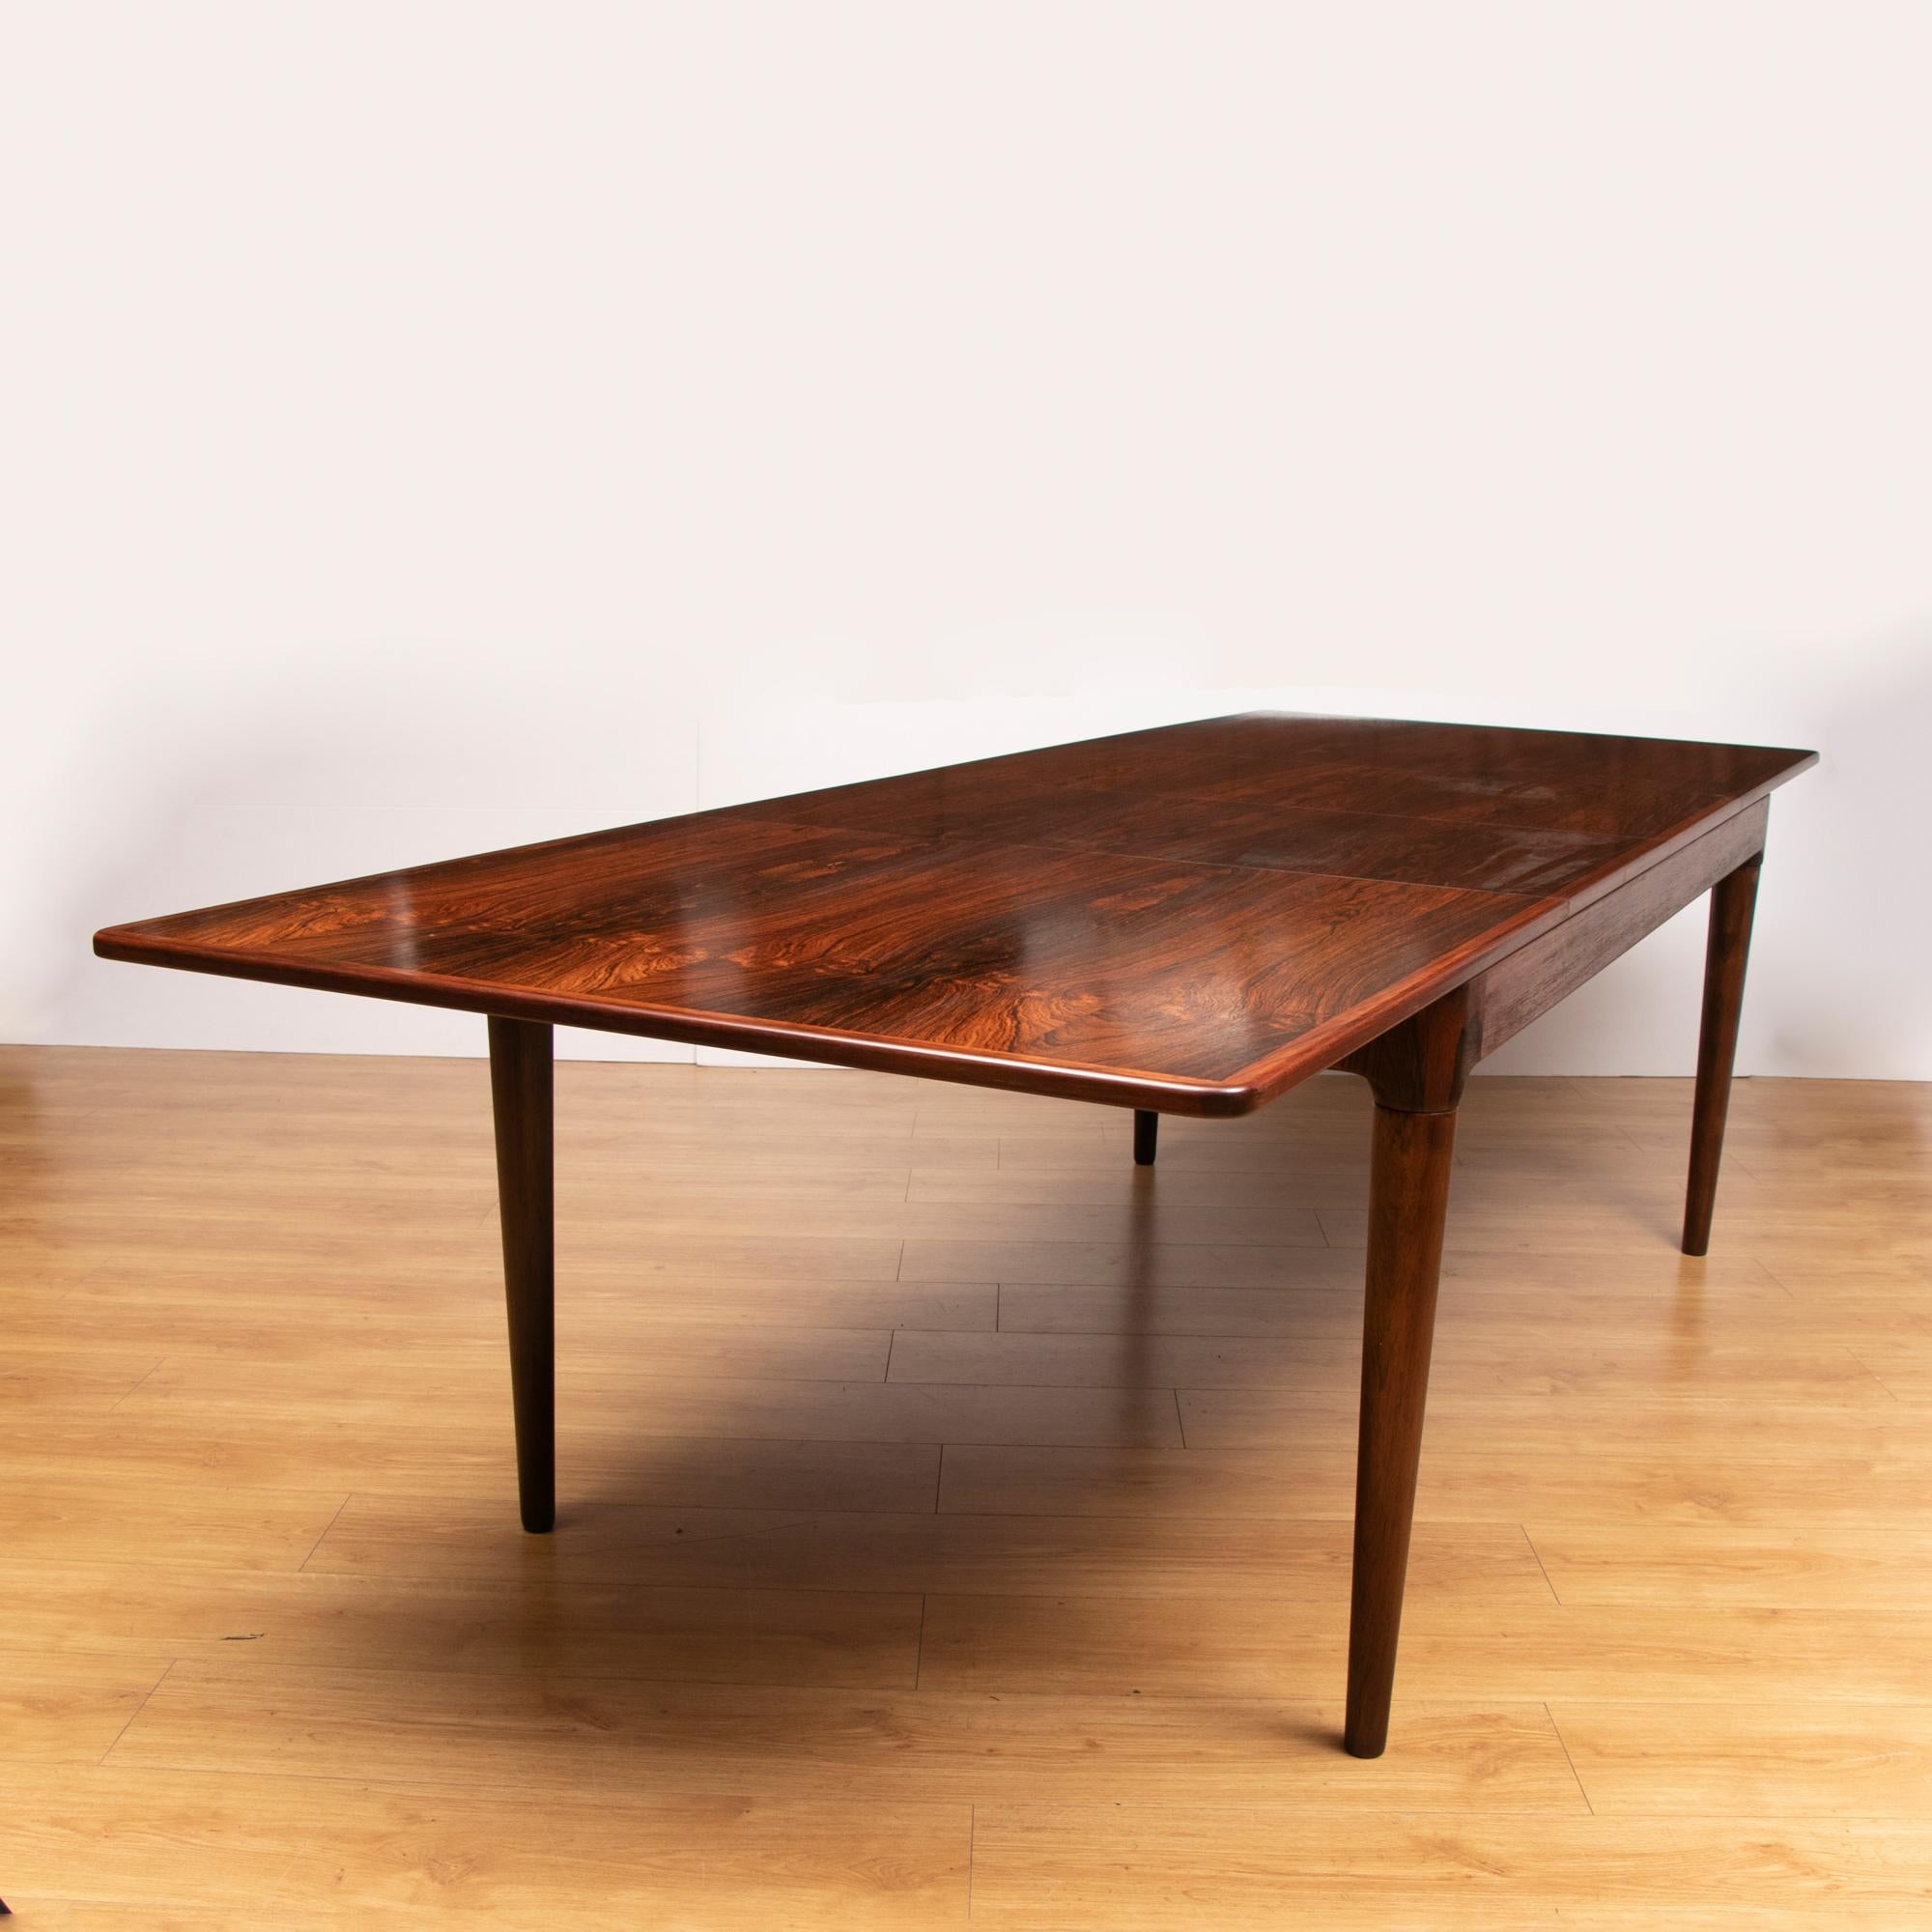 1960s Danish Mogens Kold for Arne Hovmand Olsen Brazilian rosewood two-leaf extendable dining table. The two separate leaves can be stored underneath the table when not in use. The solid Rosewood legs screw into the table and are removable when the